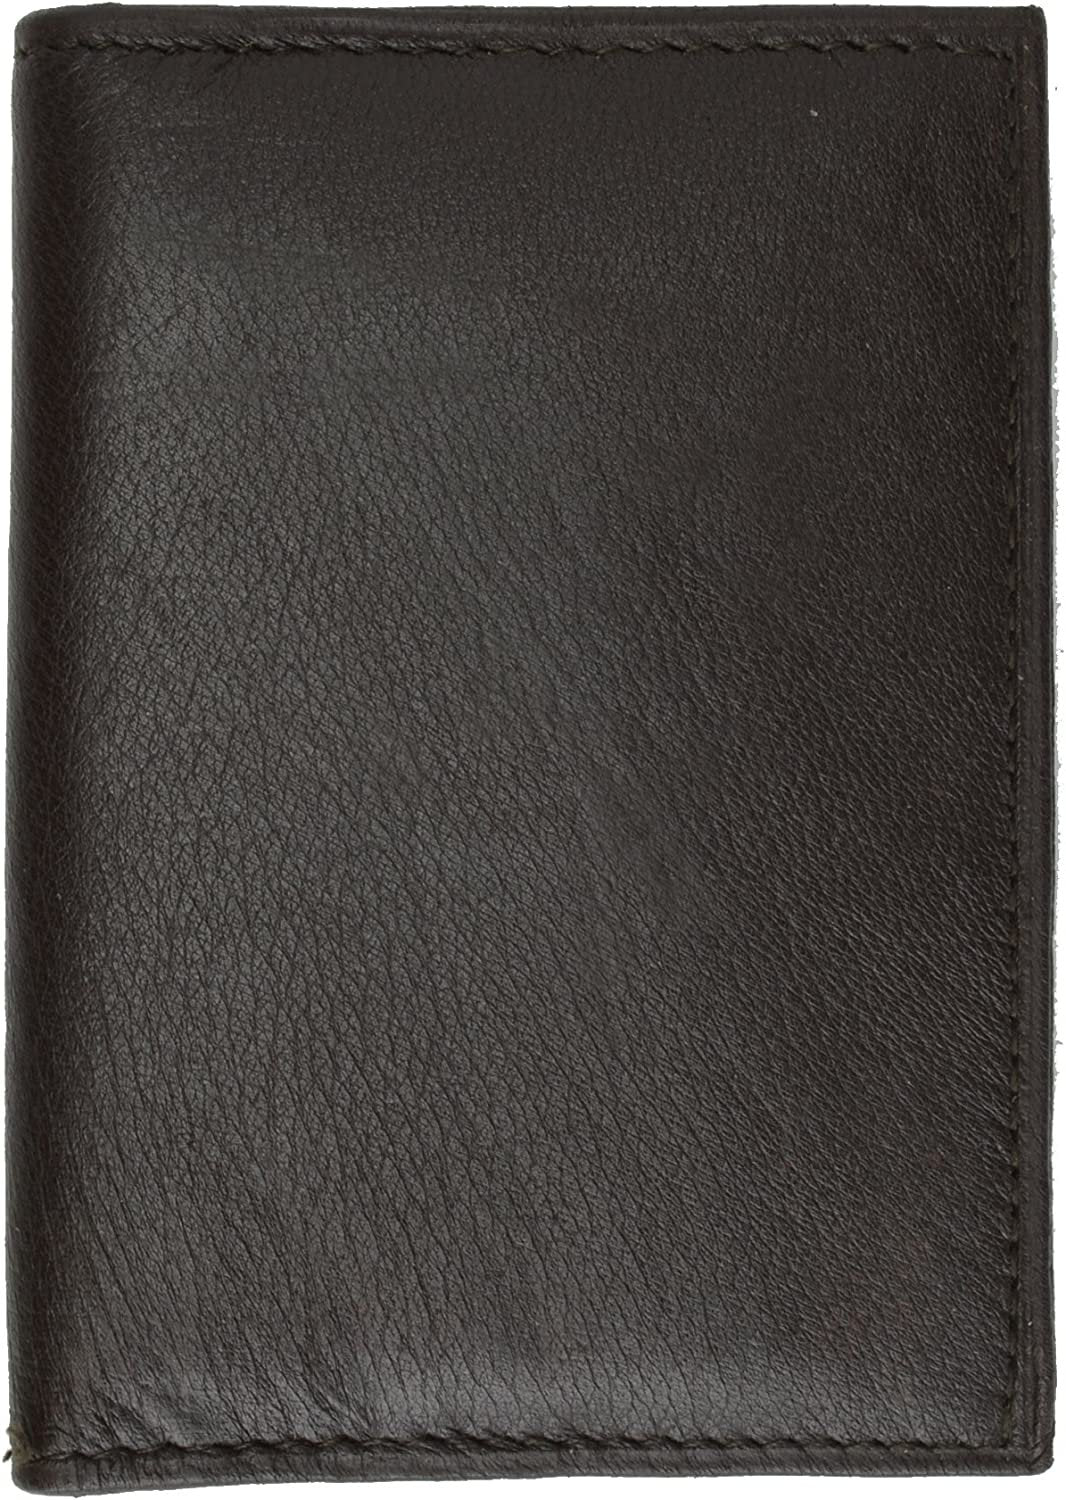 Marshal Men's Credit card Holder with Id Window and Zipper Pouch-menswallet